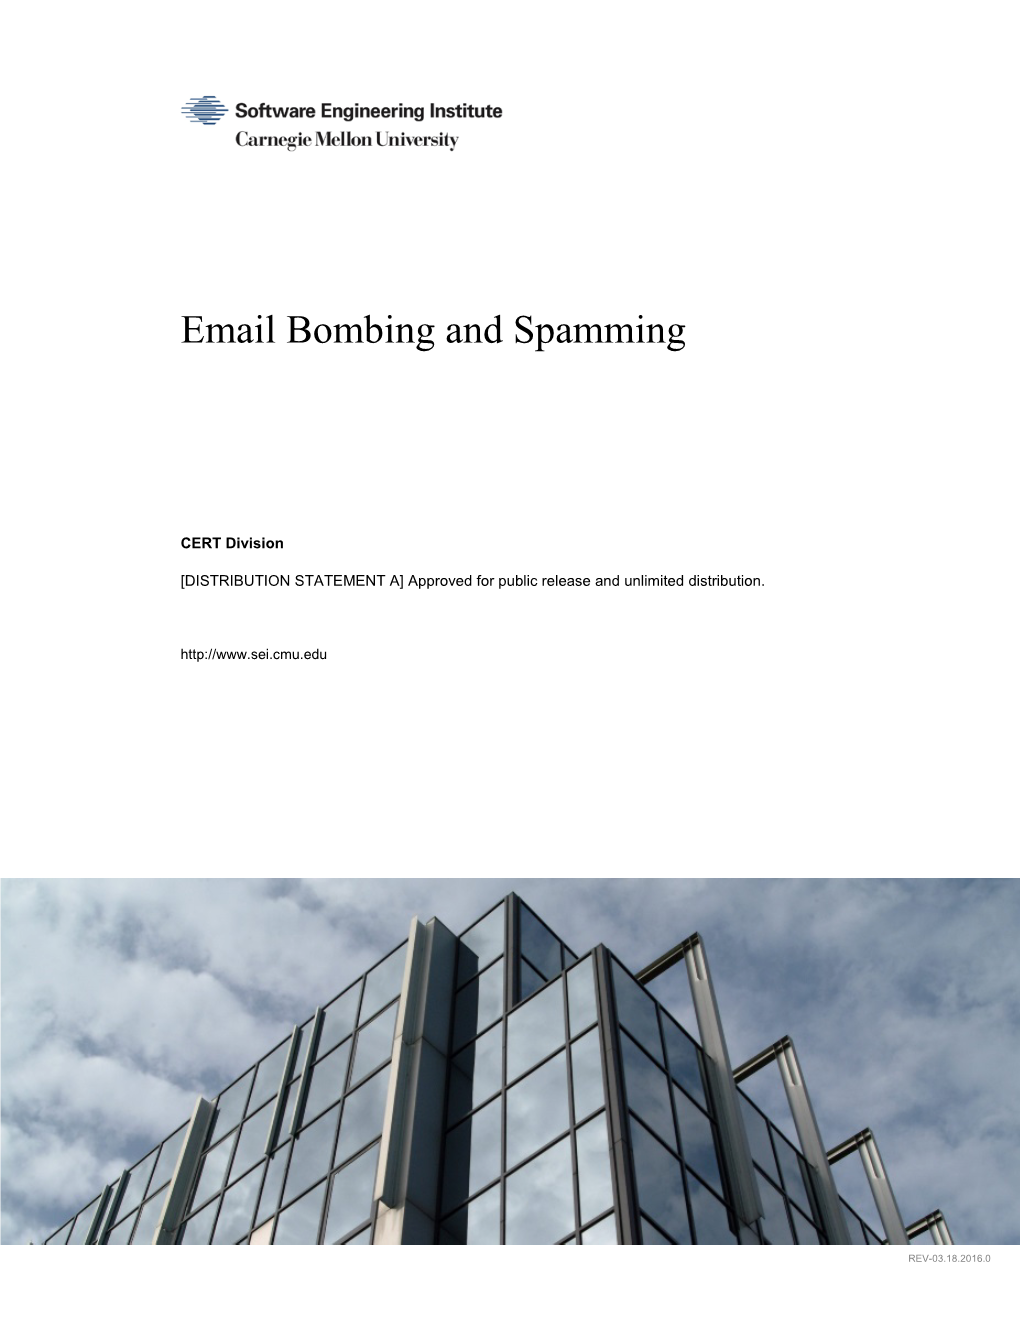 Email Bombing and Spamming